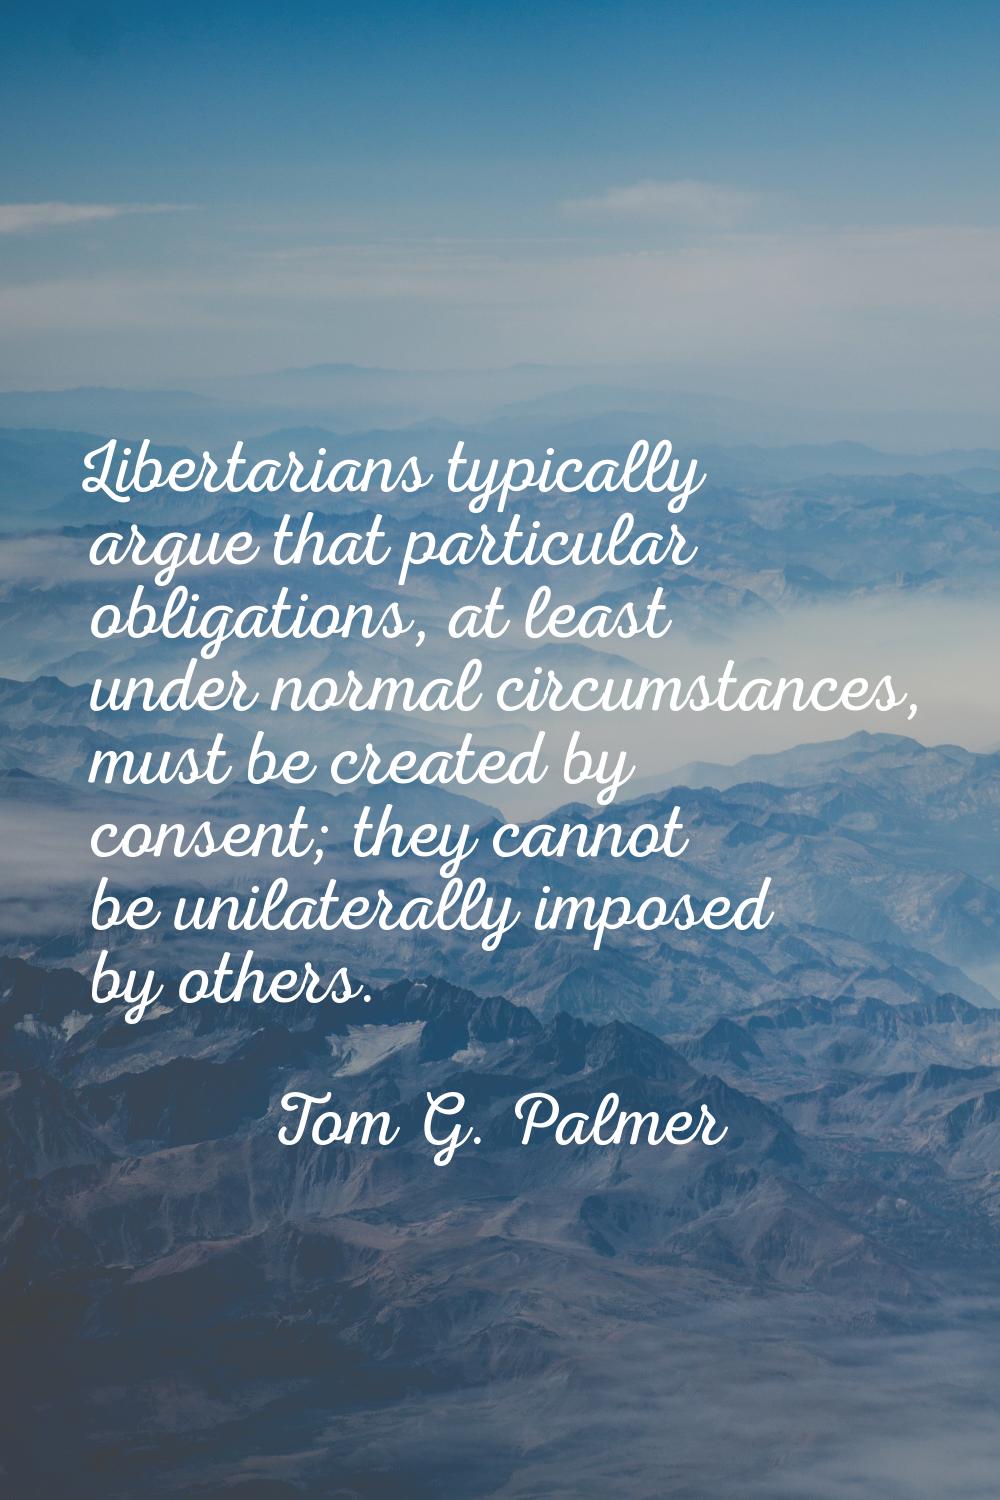 Libertarians typically argue that particular obligations, at least under normal circumstances, must